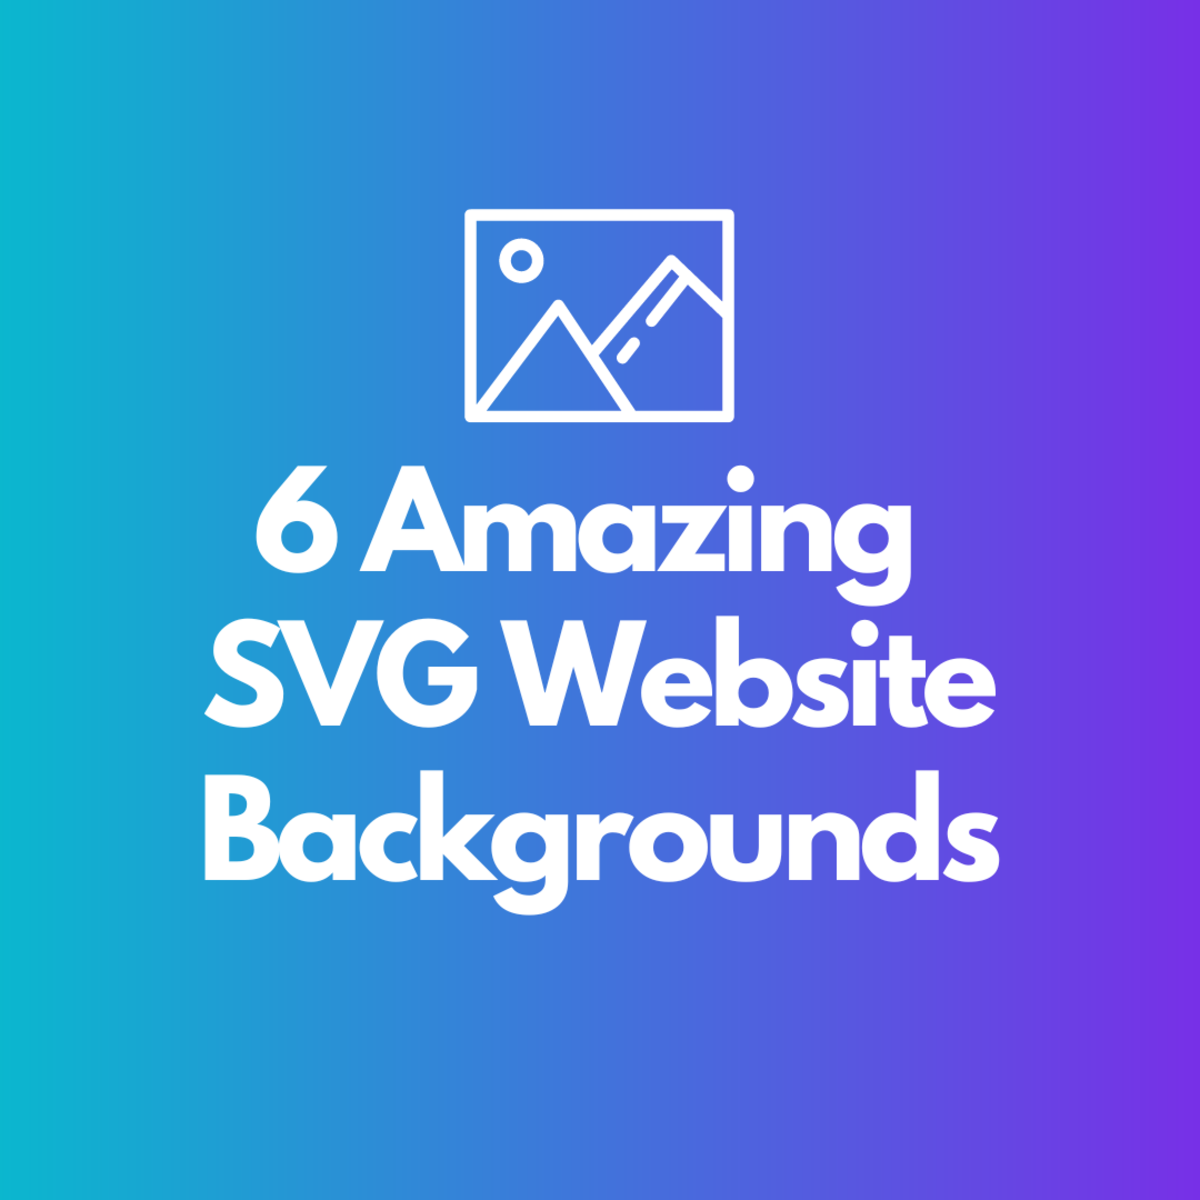 6 Amazing SVG Website Backgrounds to Check Out: The Ultimate List